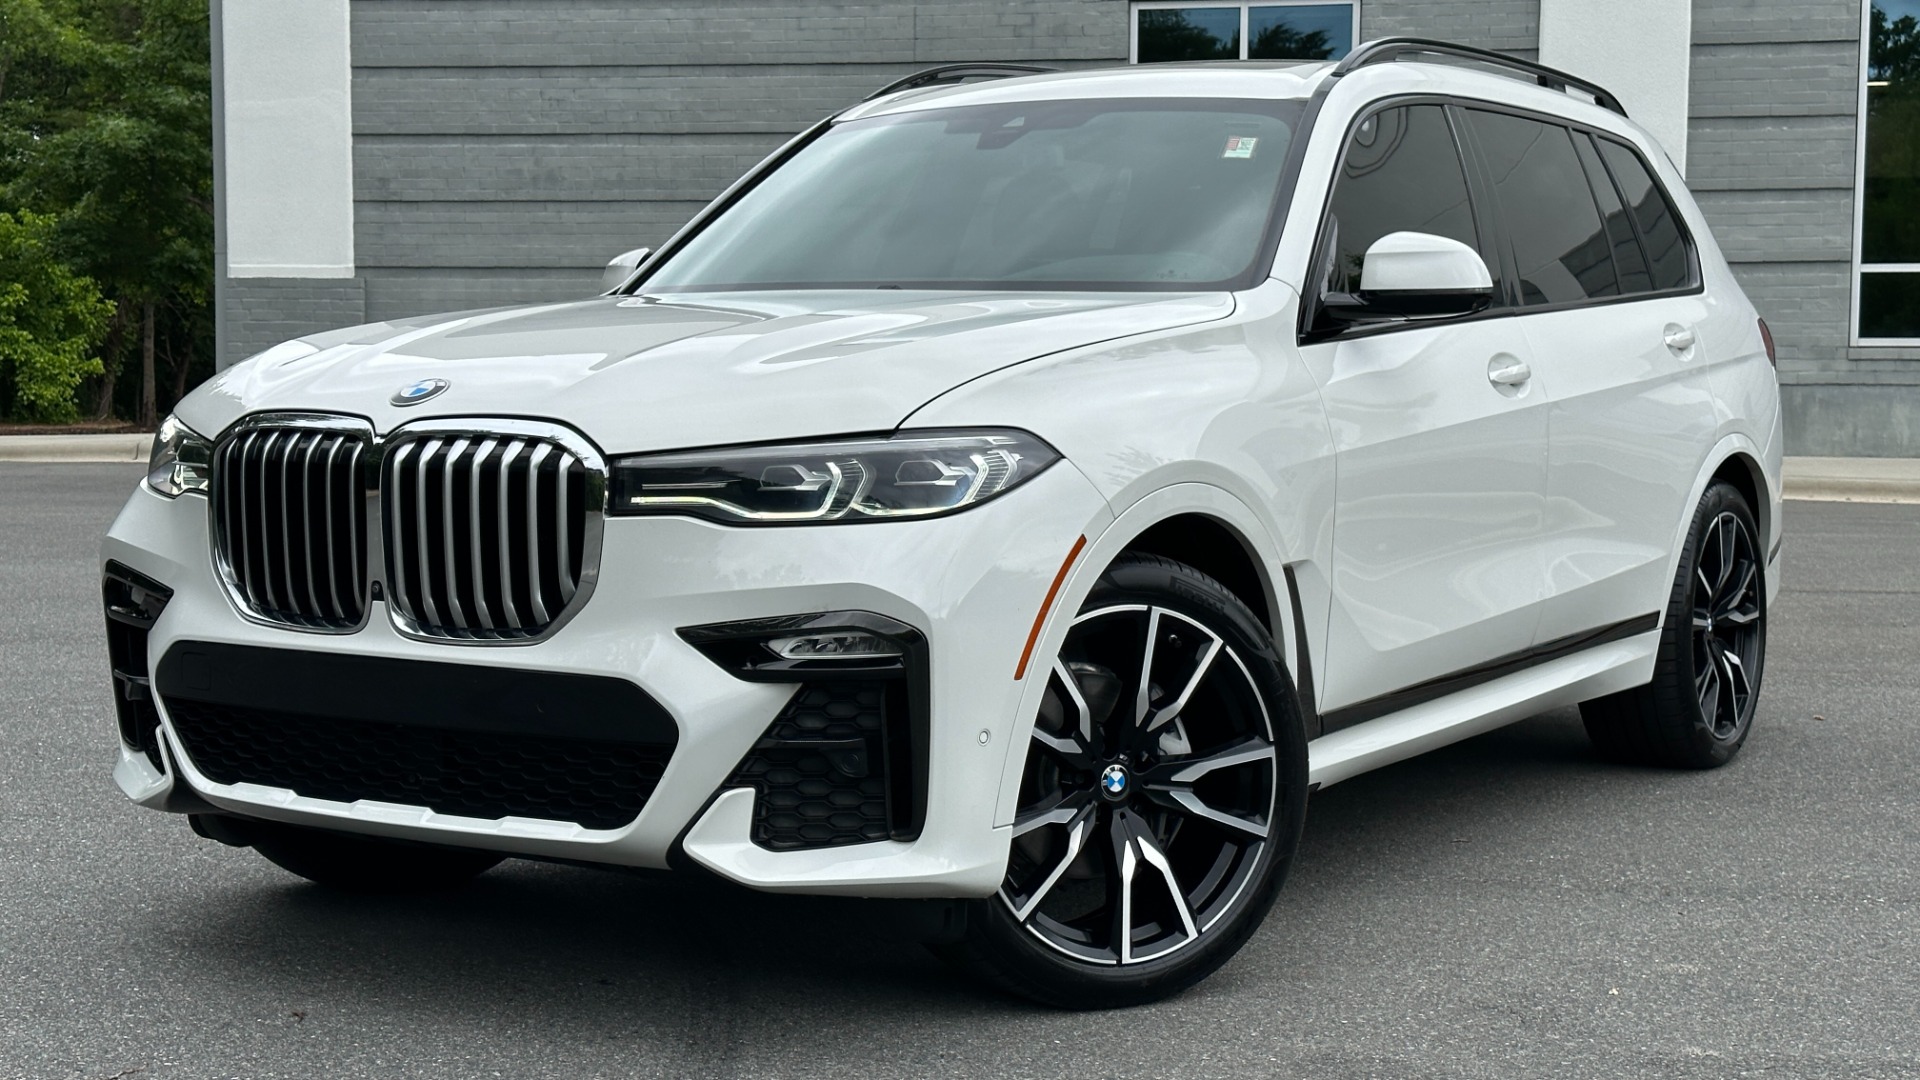 Used 2020 BMW X7 xDrive40i / 22IN WHEELS / CAPTAIN CHAIRS / M SPORT / PREMIUM PKG for sale $59,995 at Formula Imports in Charlotte NC 28227 1